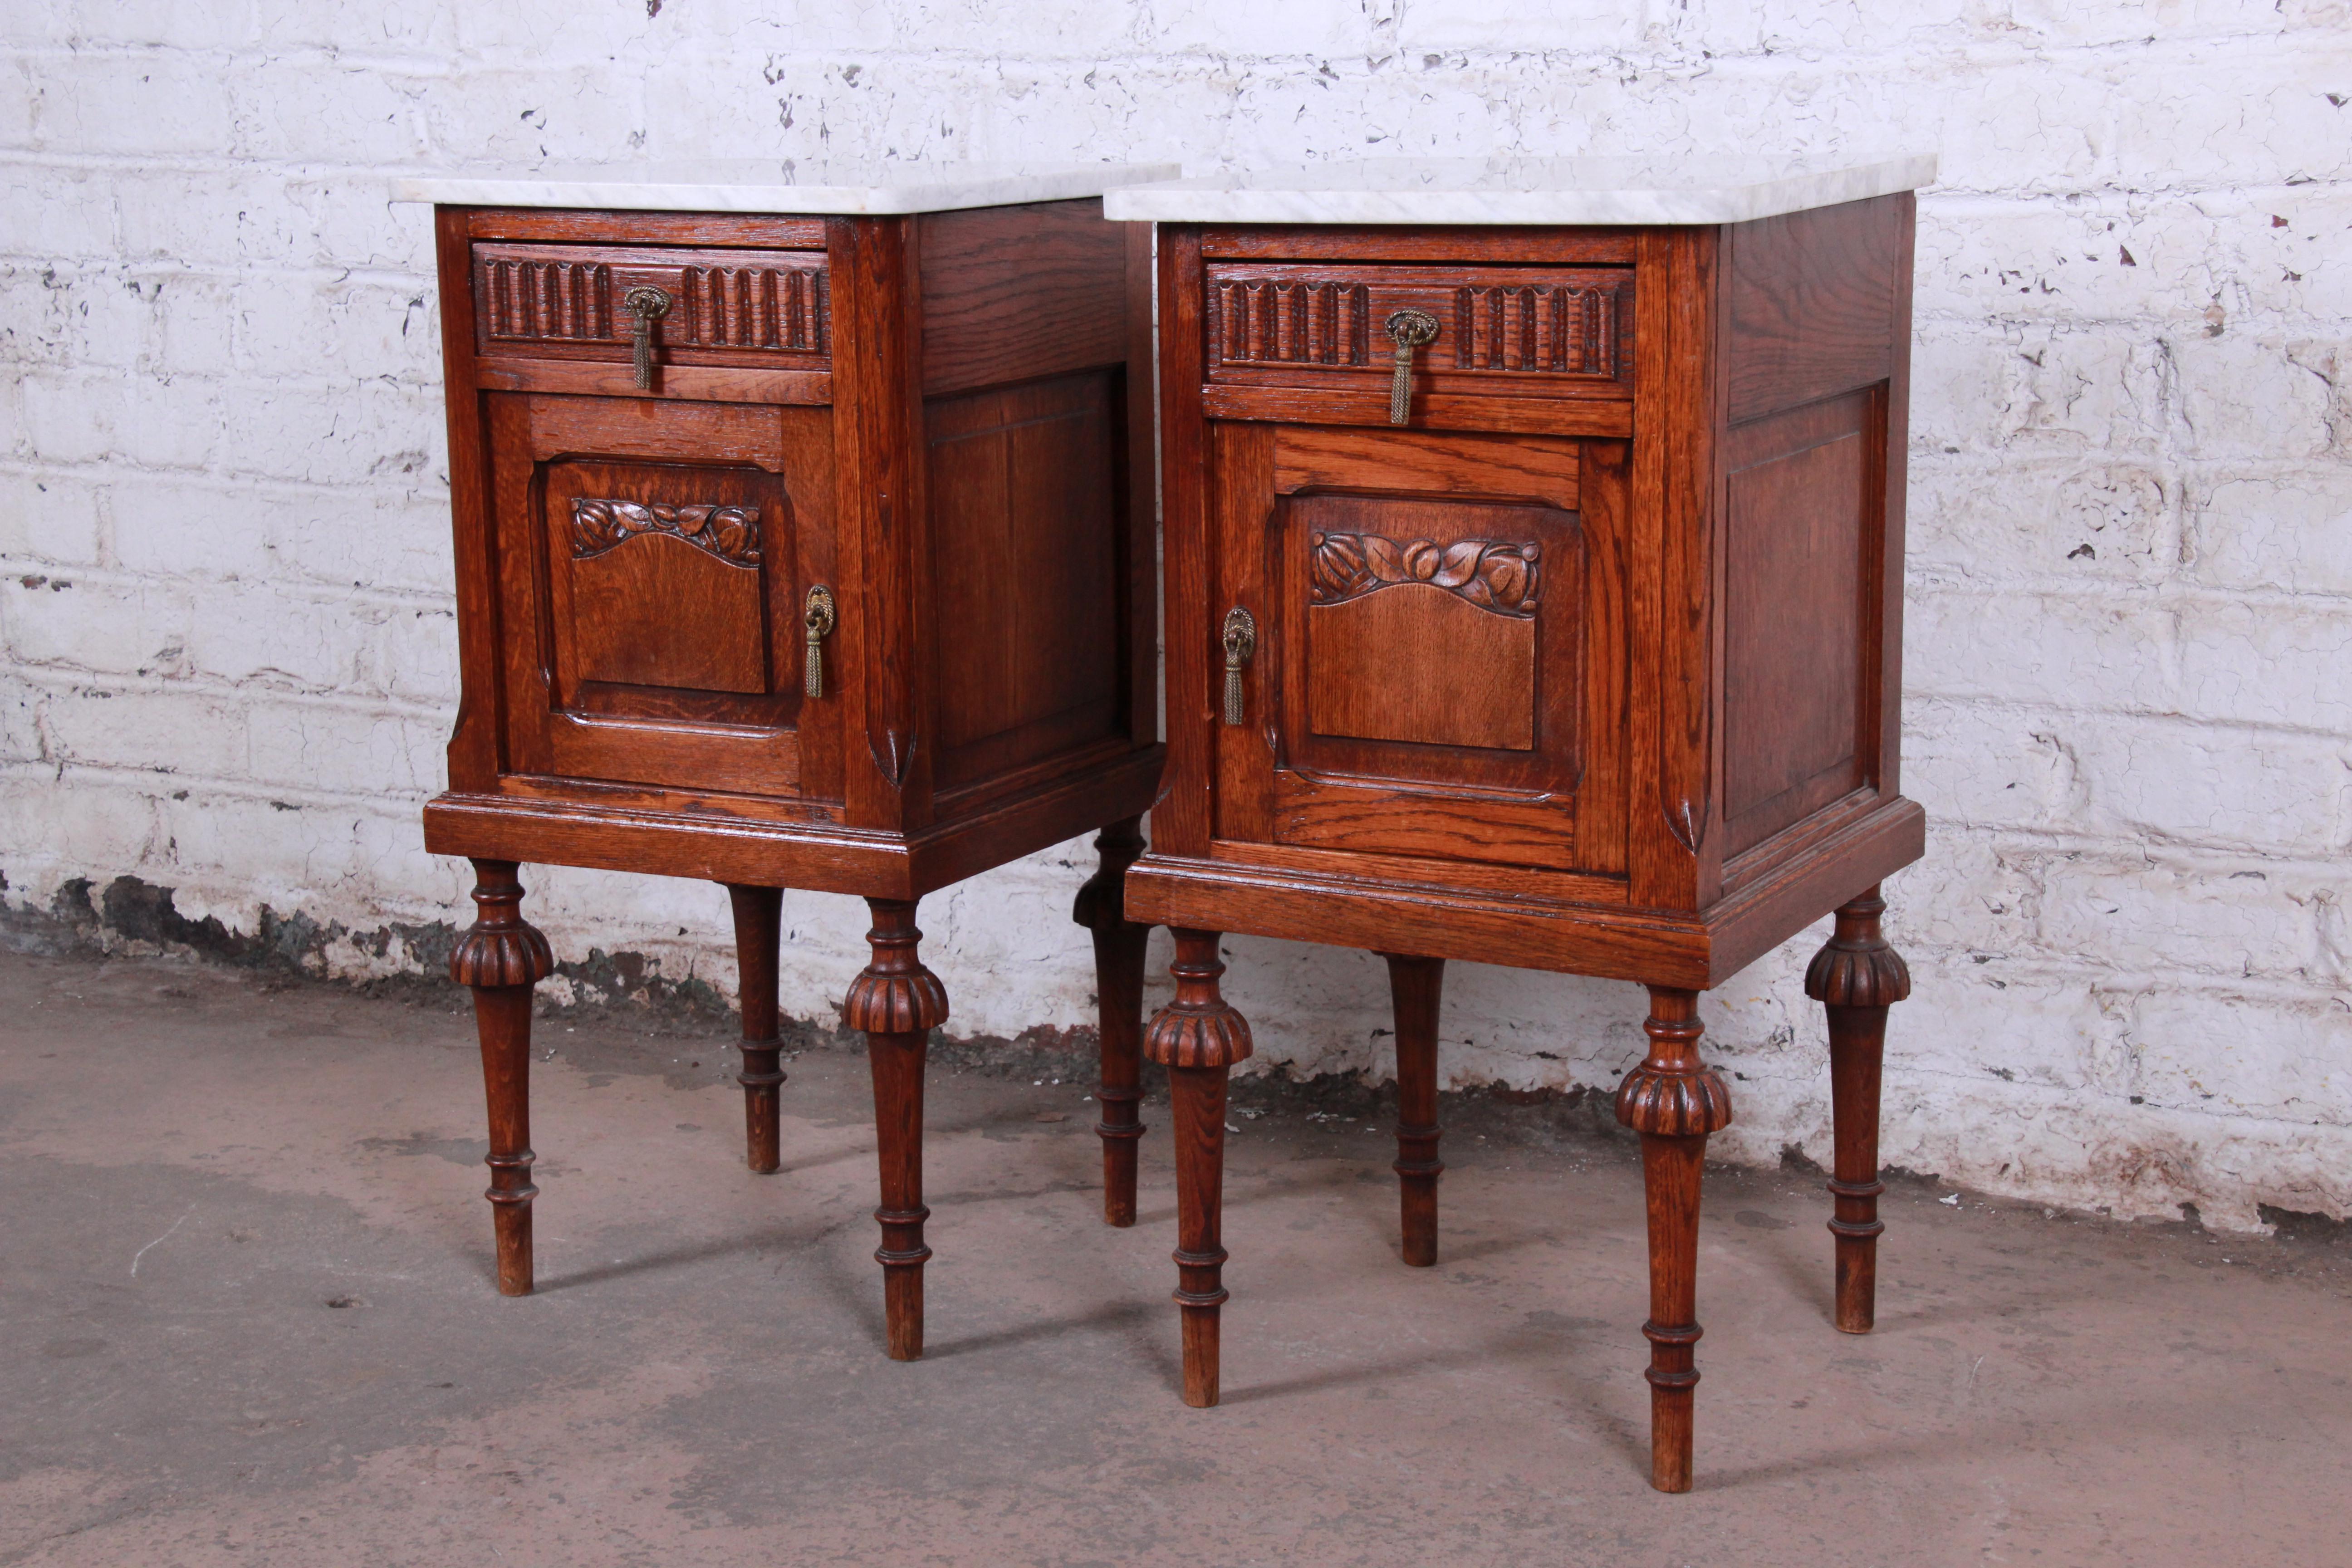 An exceptional pair of 19th century Victorian carved solid oak nightstands. The nightstands feature gorgeous oakwood grain with nice carved details and beautiful white marble tops. They offer good storage, each with one dovetailed drawer and